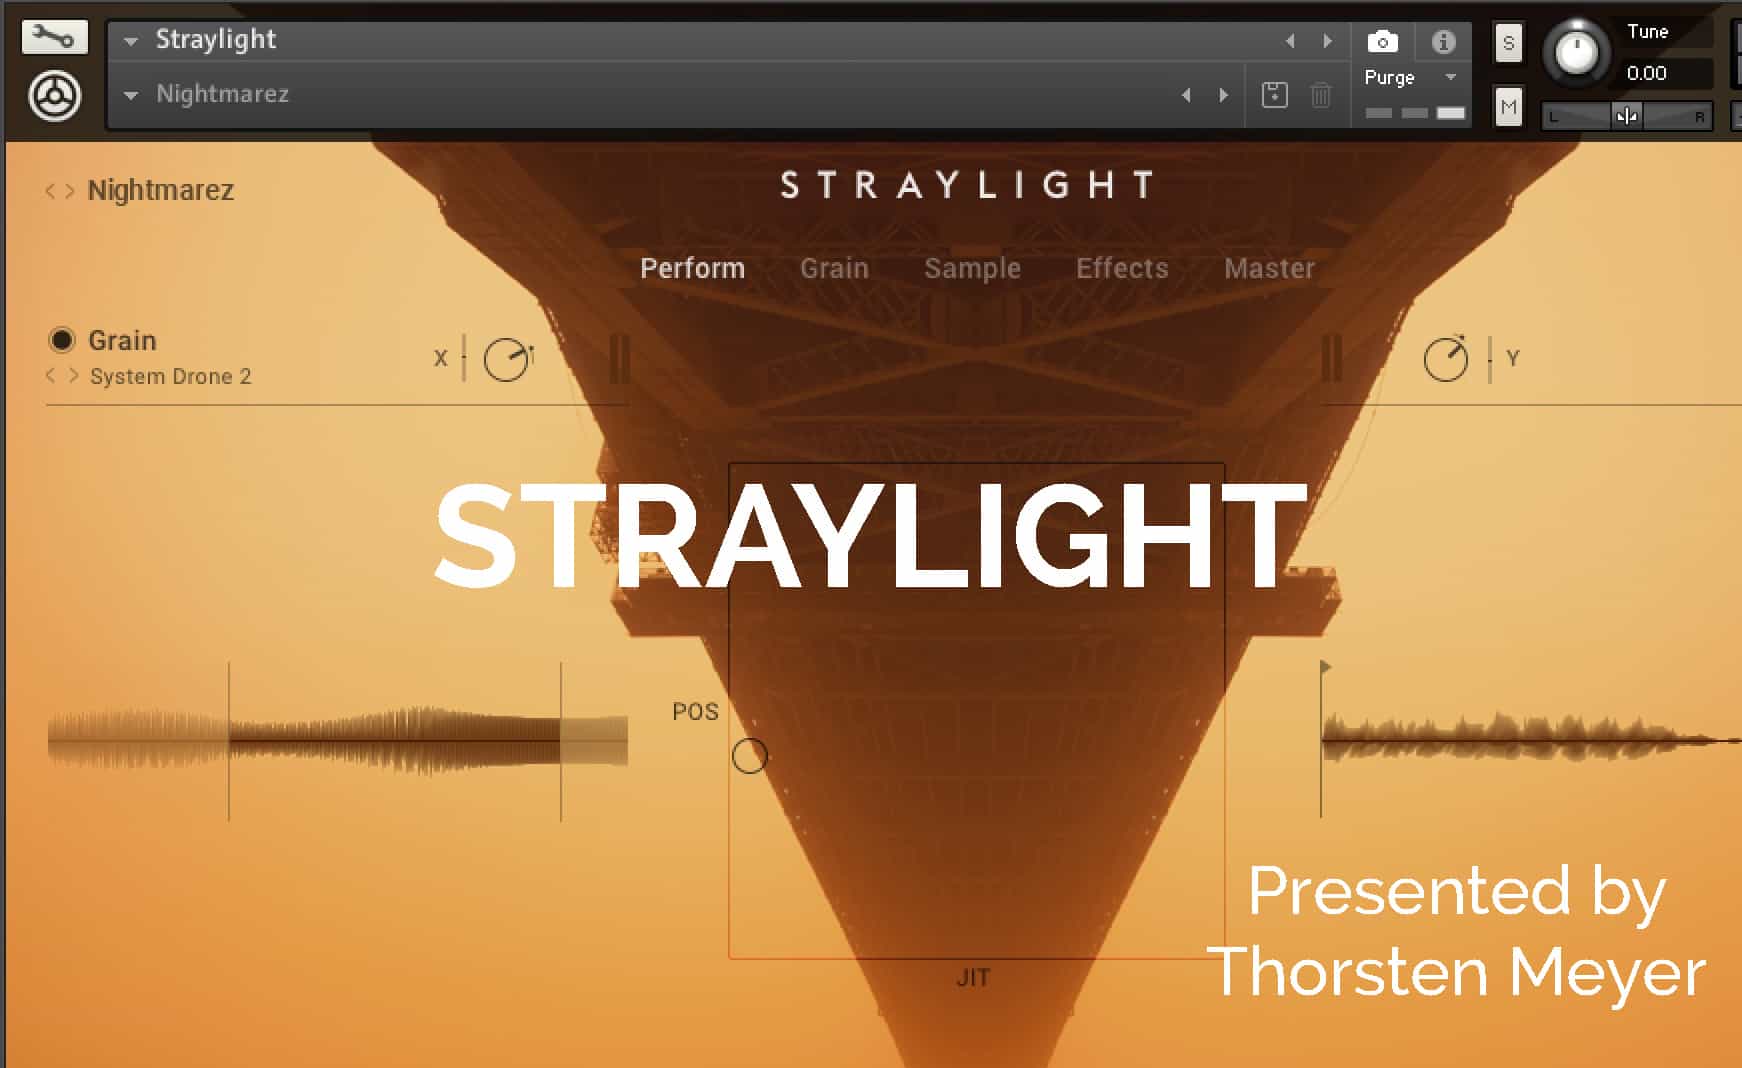 STRAYLIGHT by Native Instruments Cubase and using TouchOSC